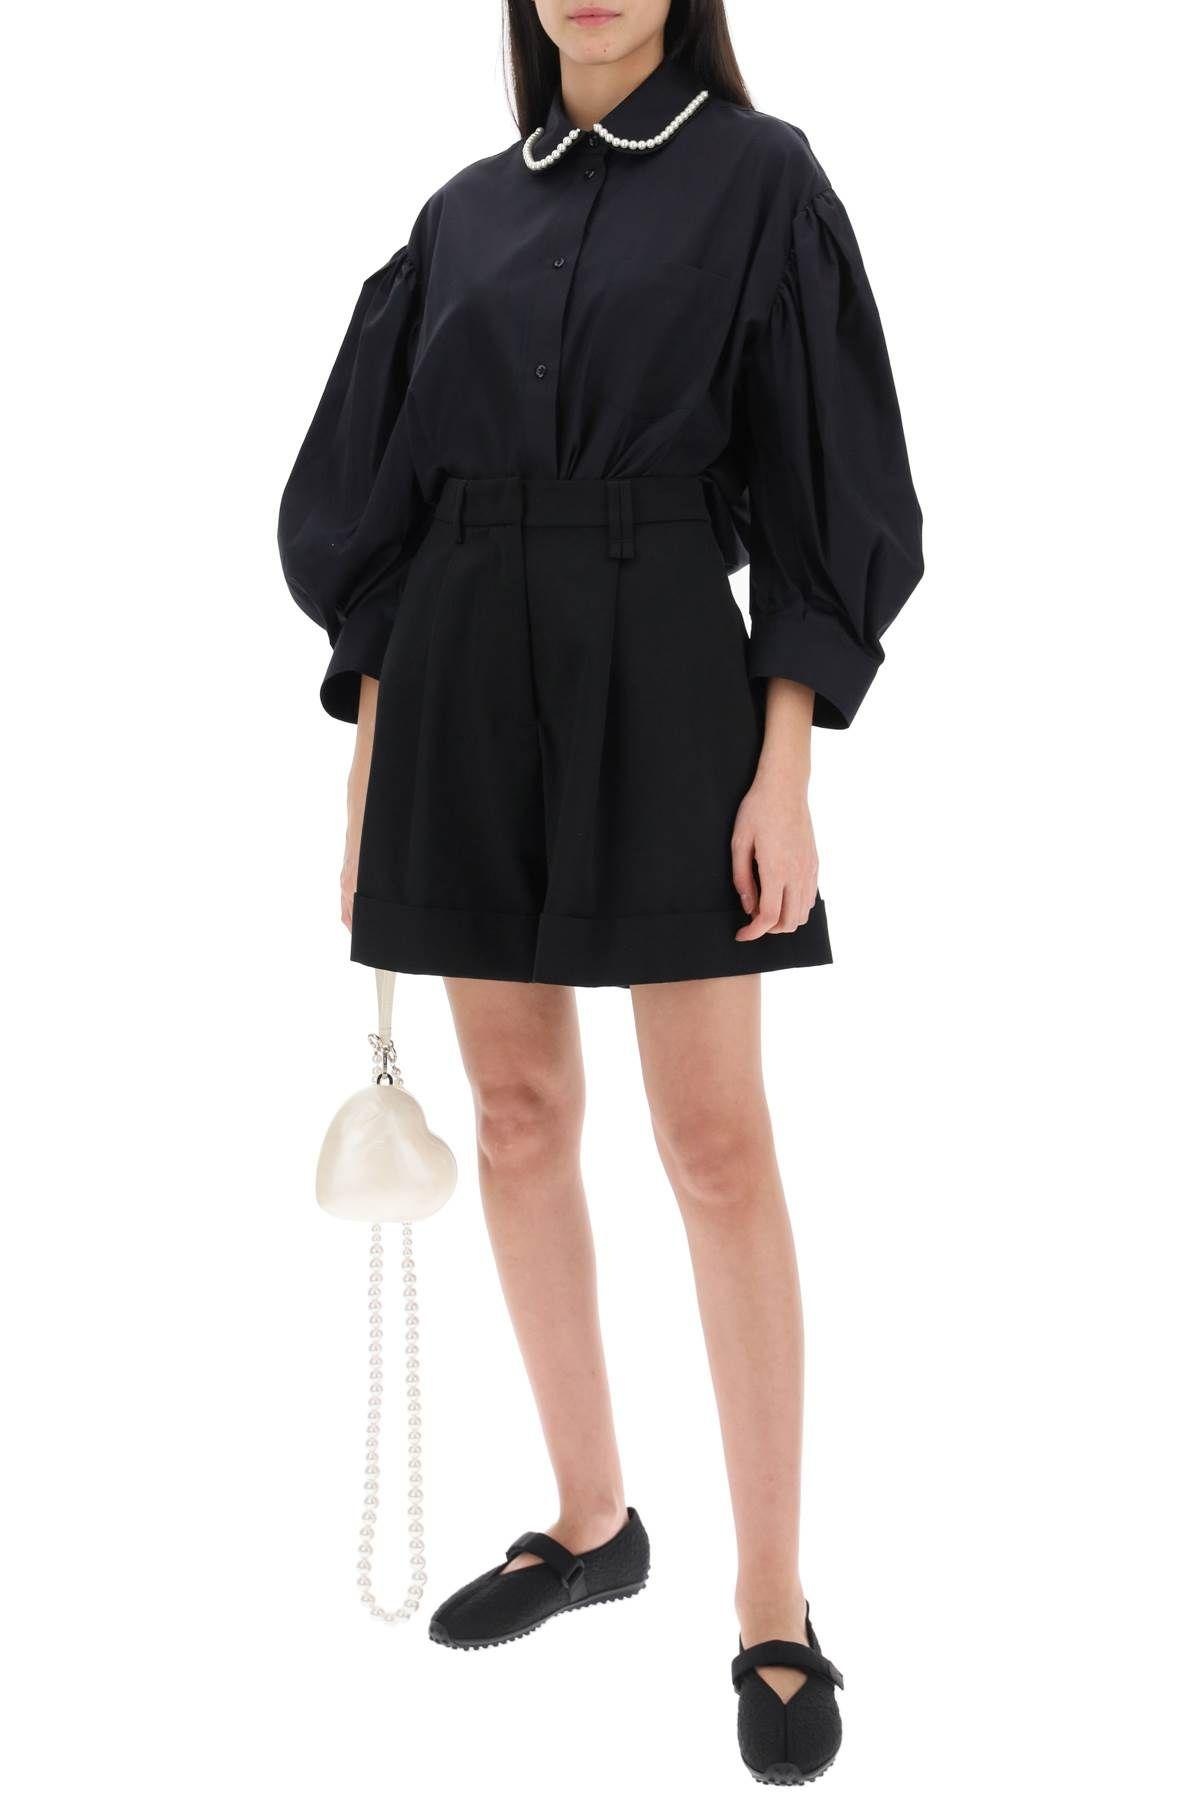 "Oversized blouse with puffed sleeves" Simone Rocha - 2